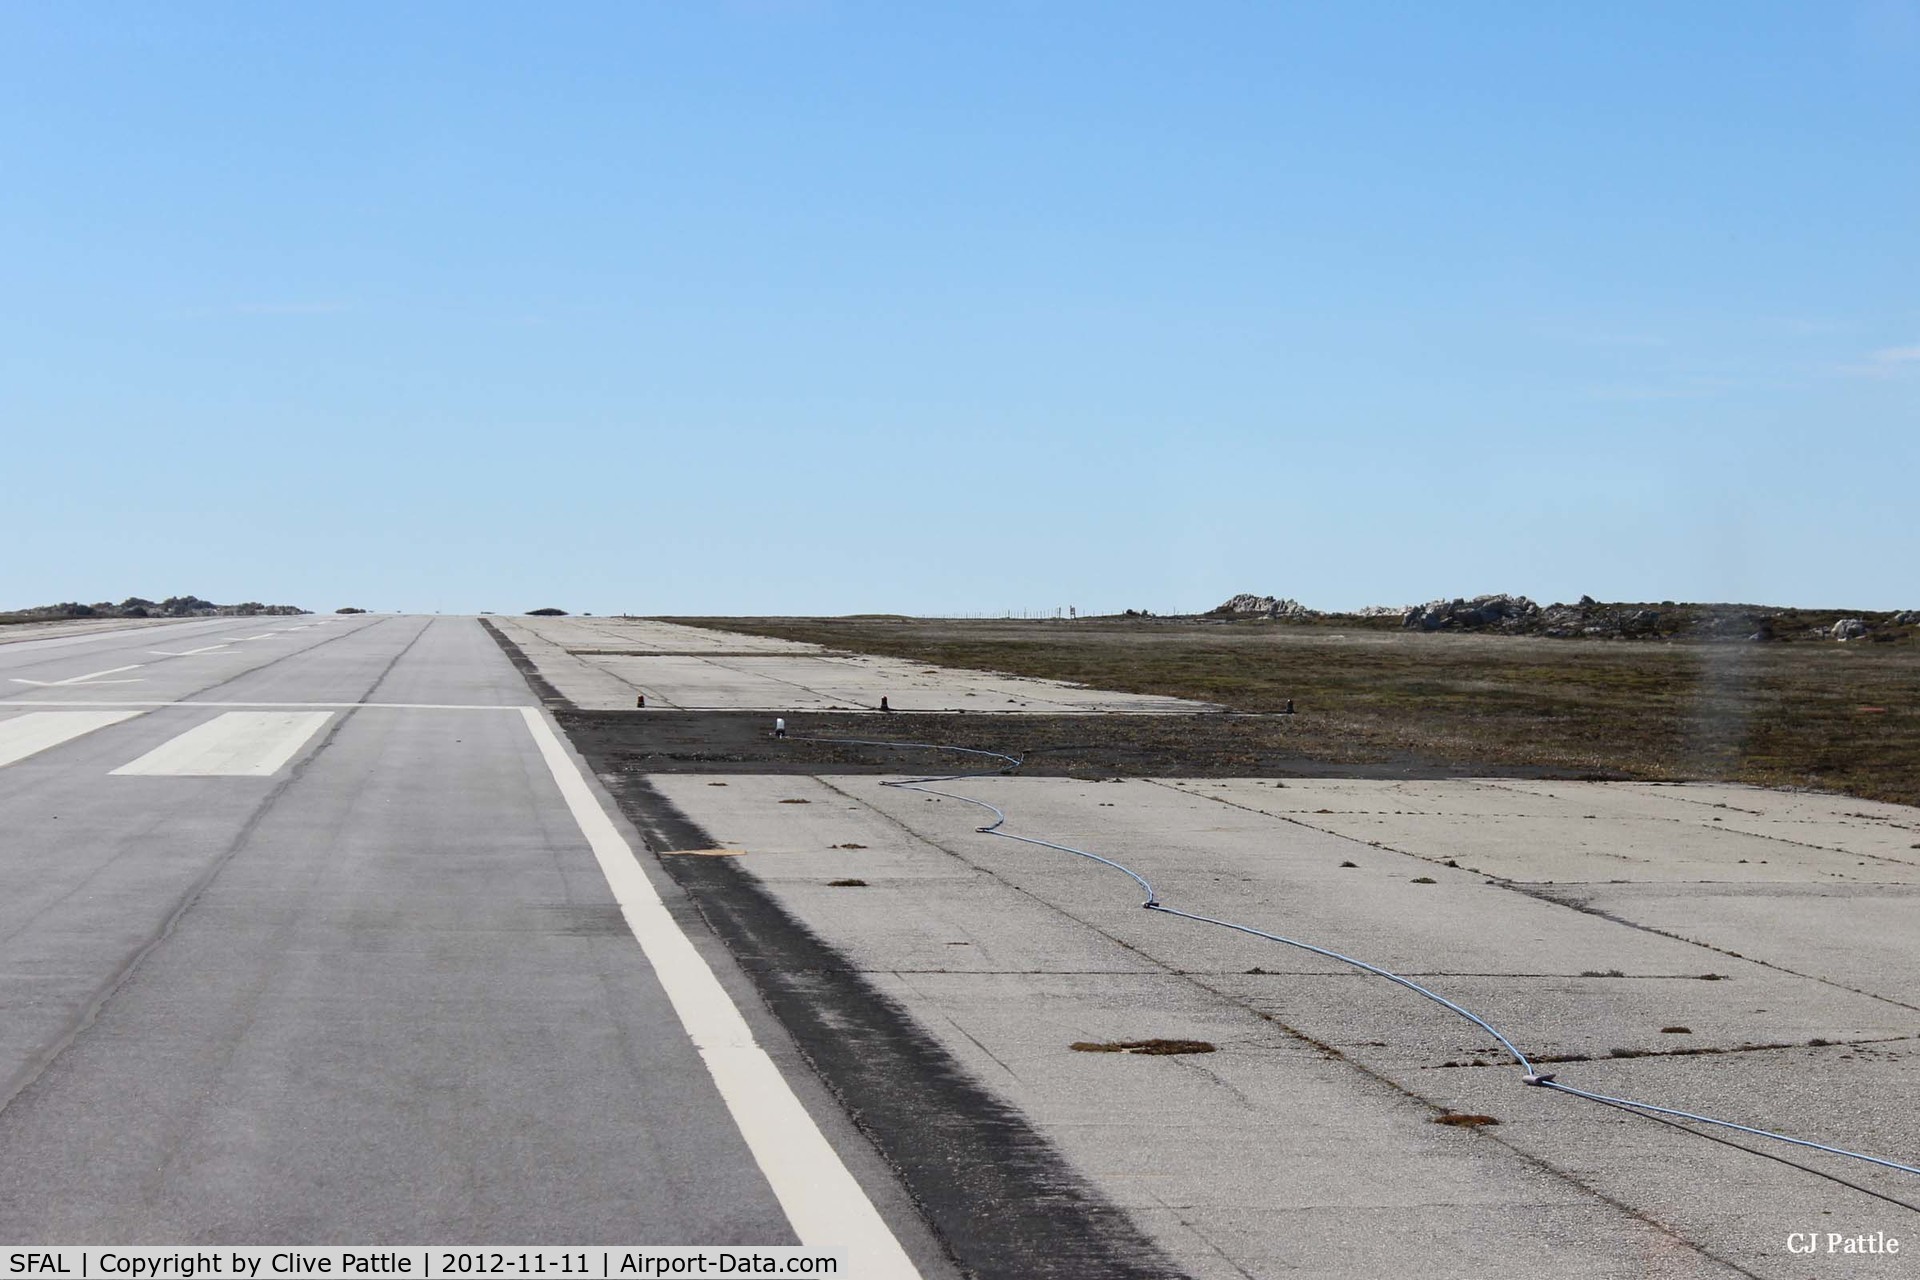 SFAL Airport - A darkened area of tarmac on the edge of the main runway at Port Stanley (SFAL) clearly shows where repairs were made following the Vulcan Black Buck bombing in May 1982. 